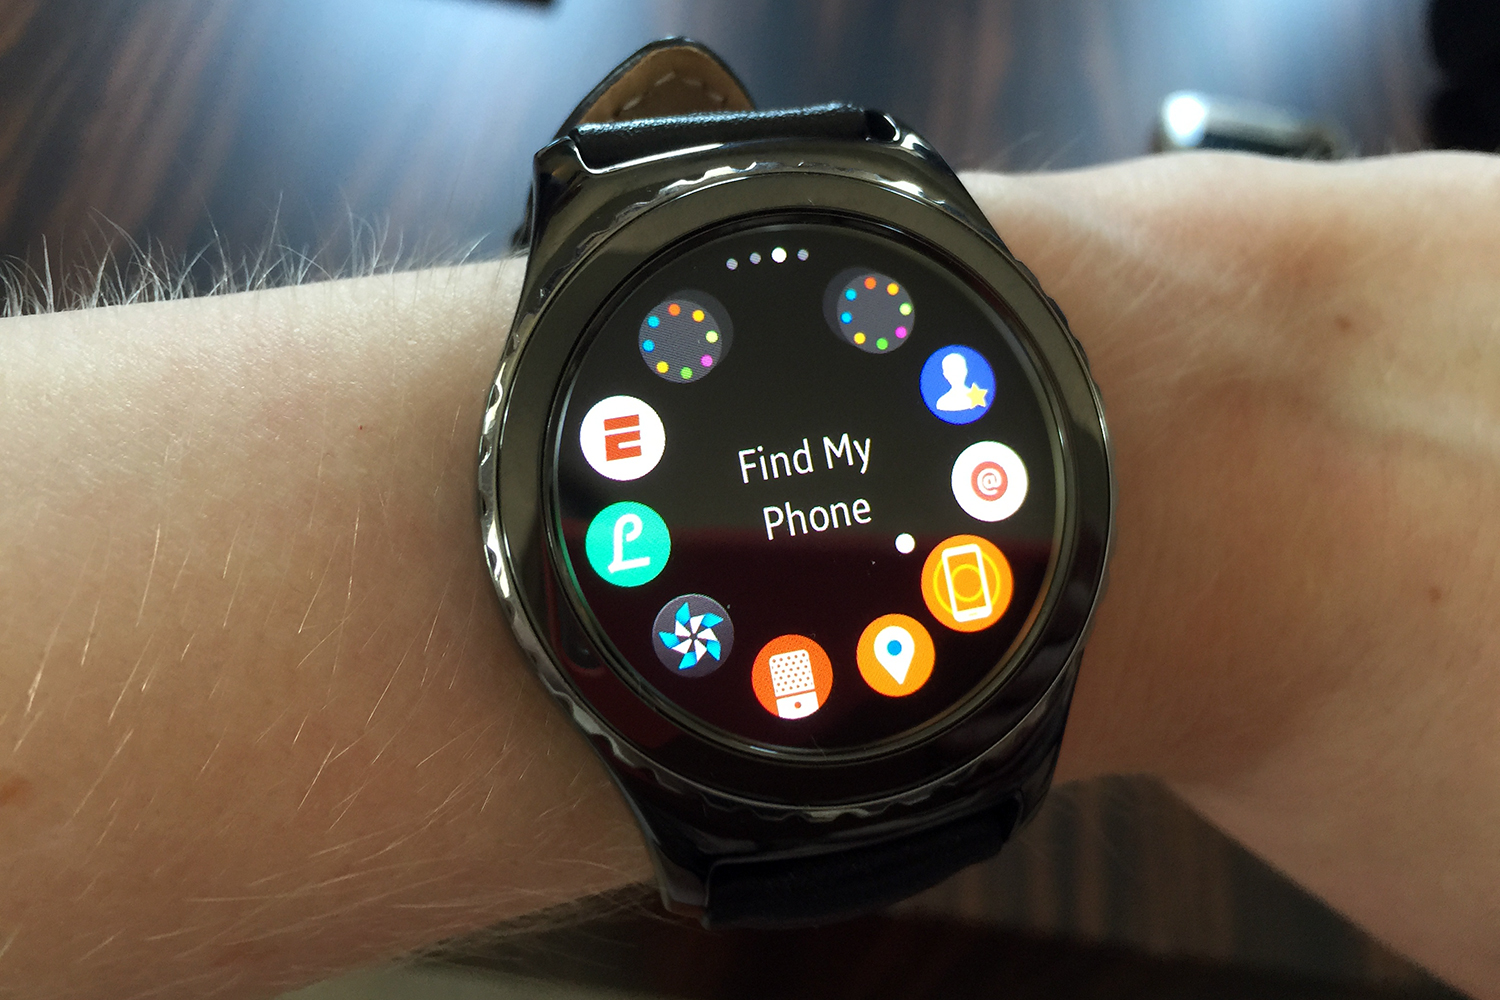 samsung gear s2 hands on classic 5336